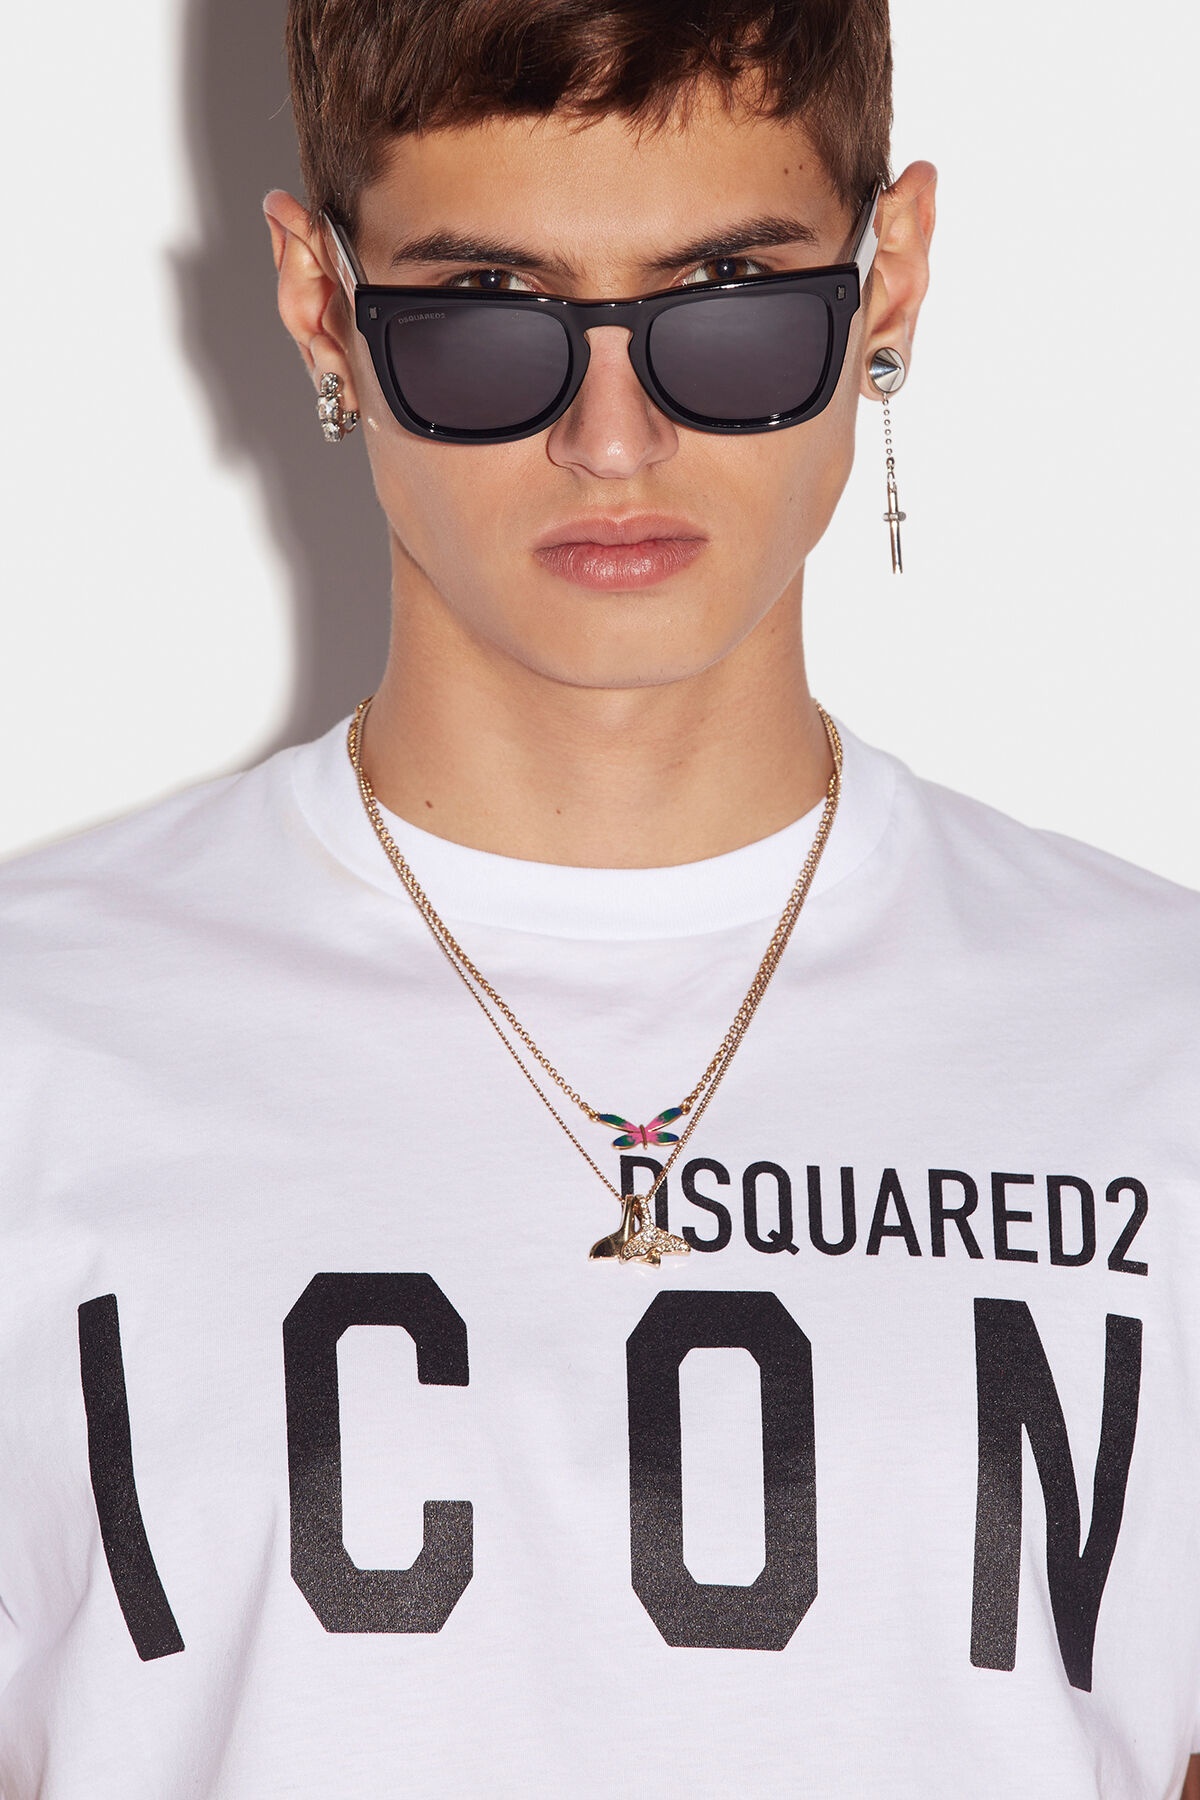 ICON COOL T-SHIRT - 3